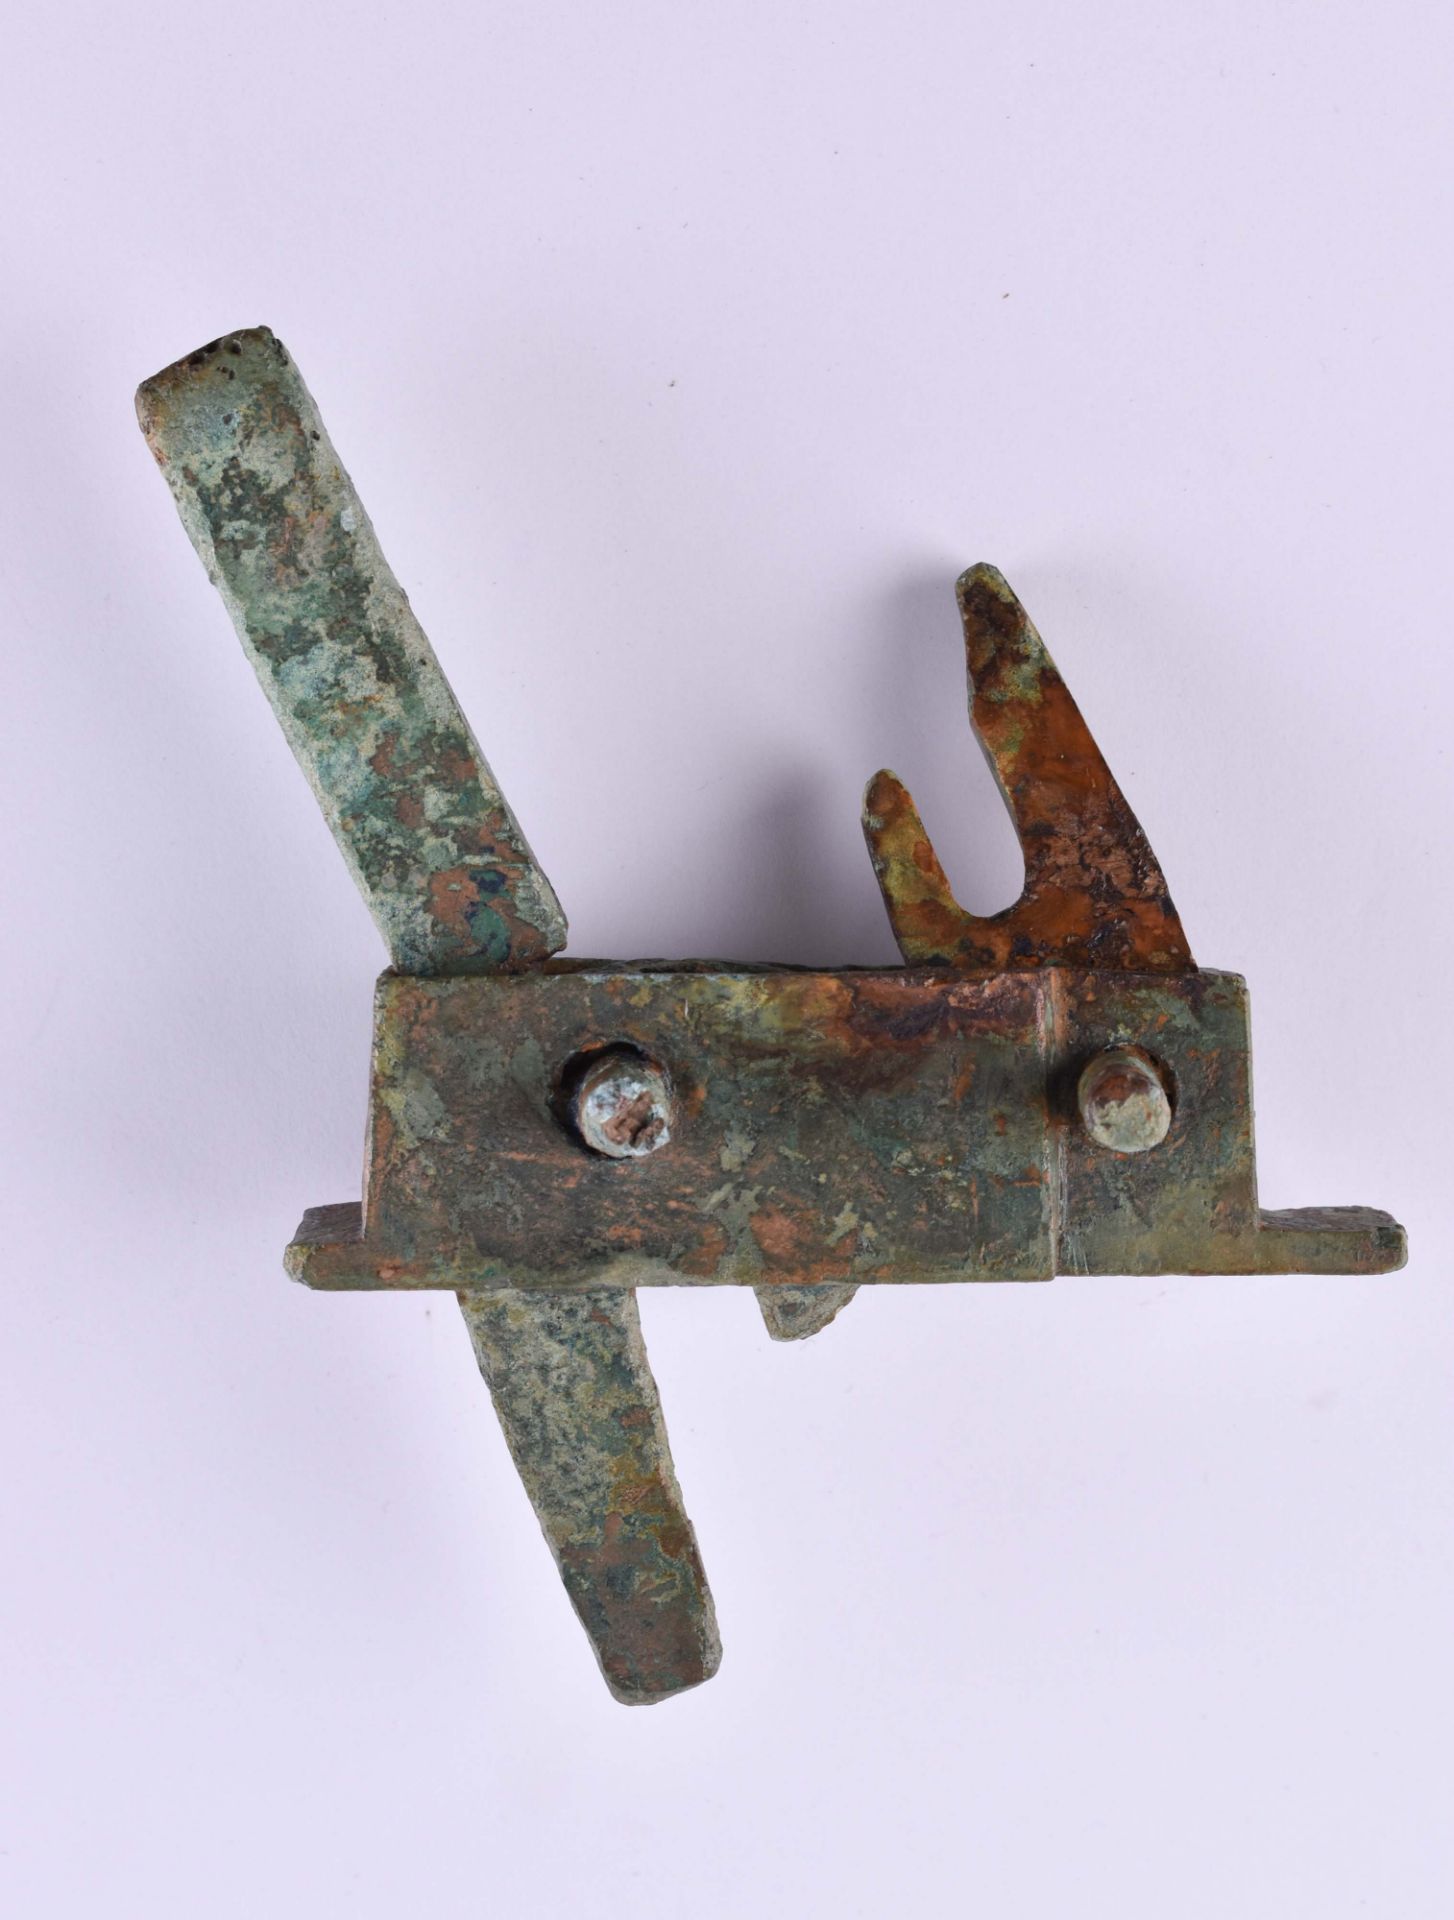  Trigger mechanism crossbow China Han dynasty - Image 5 of 5